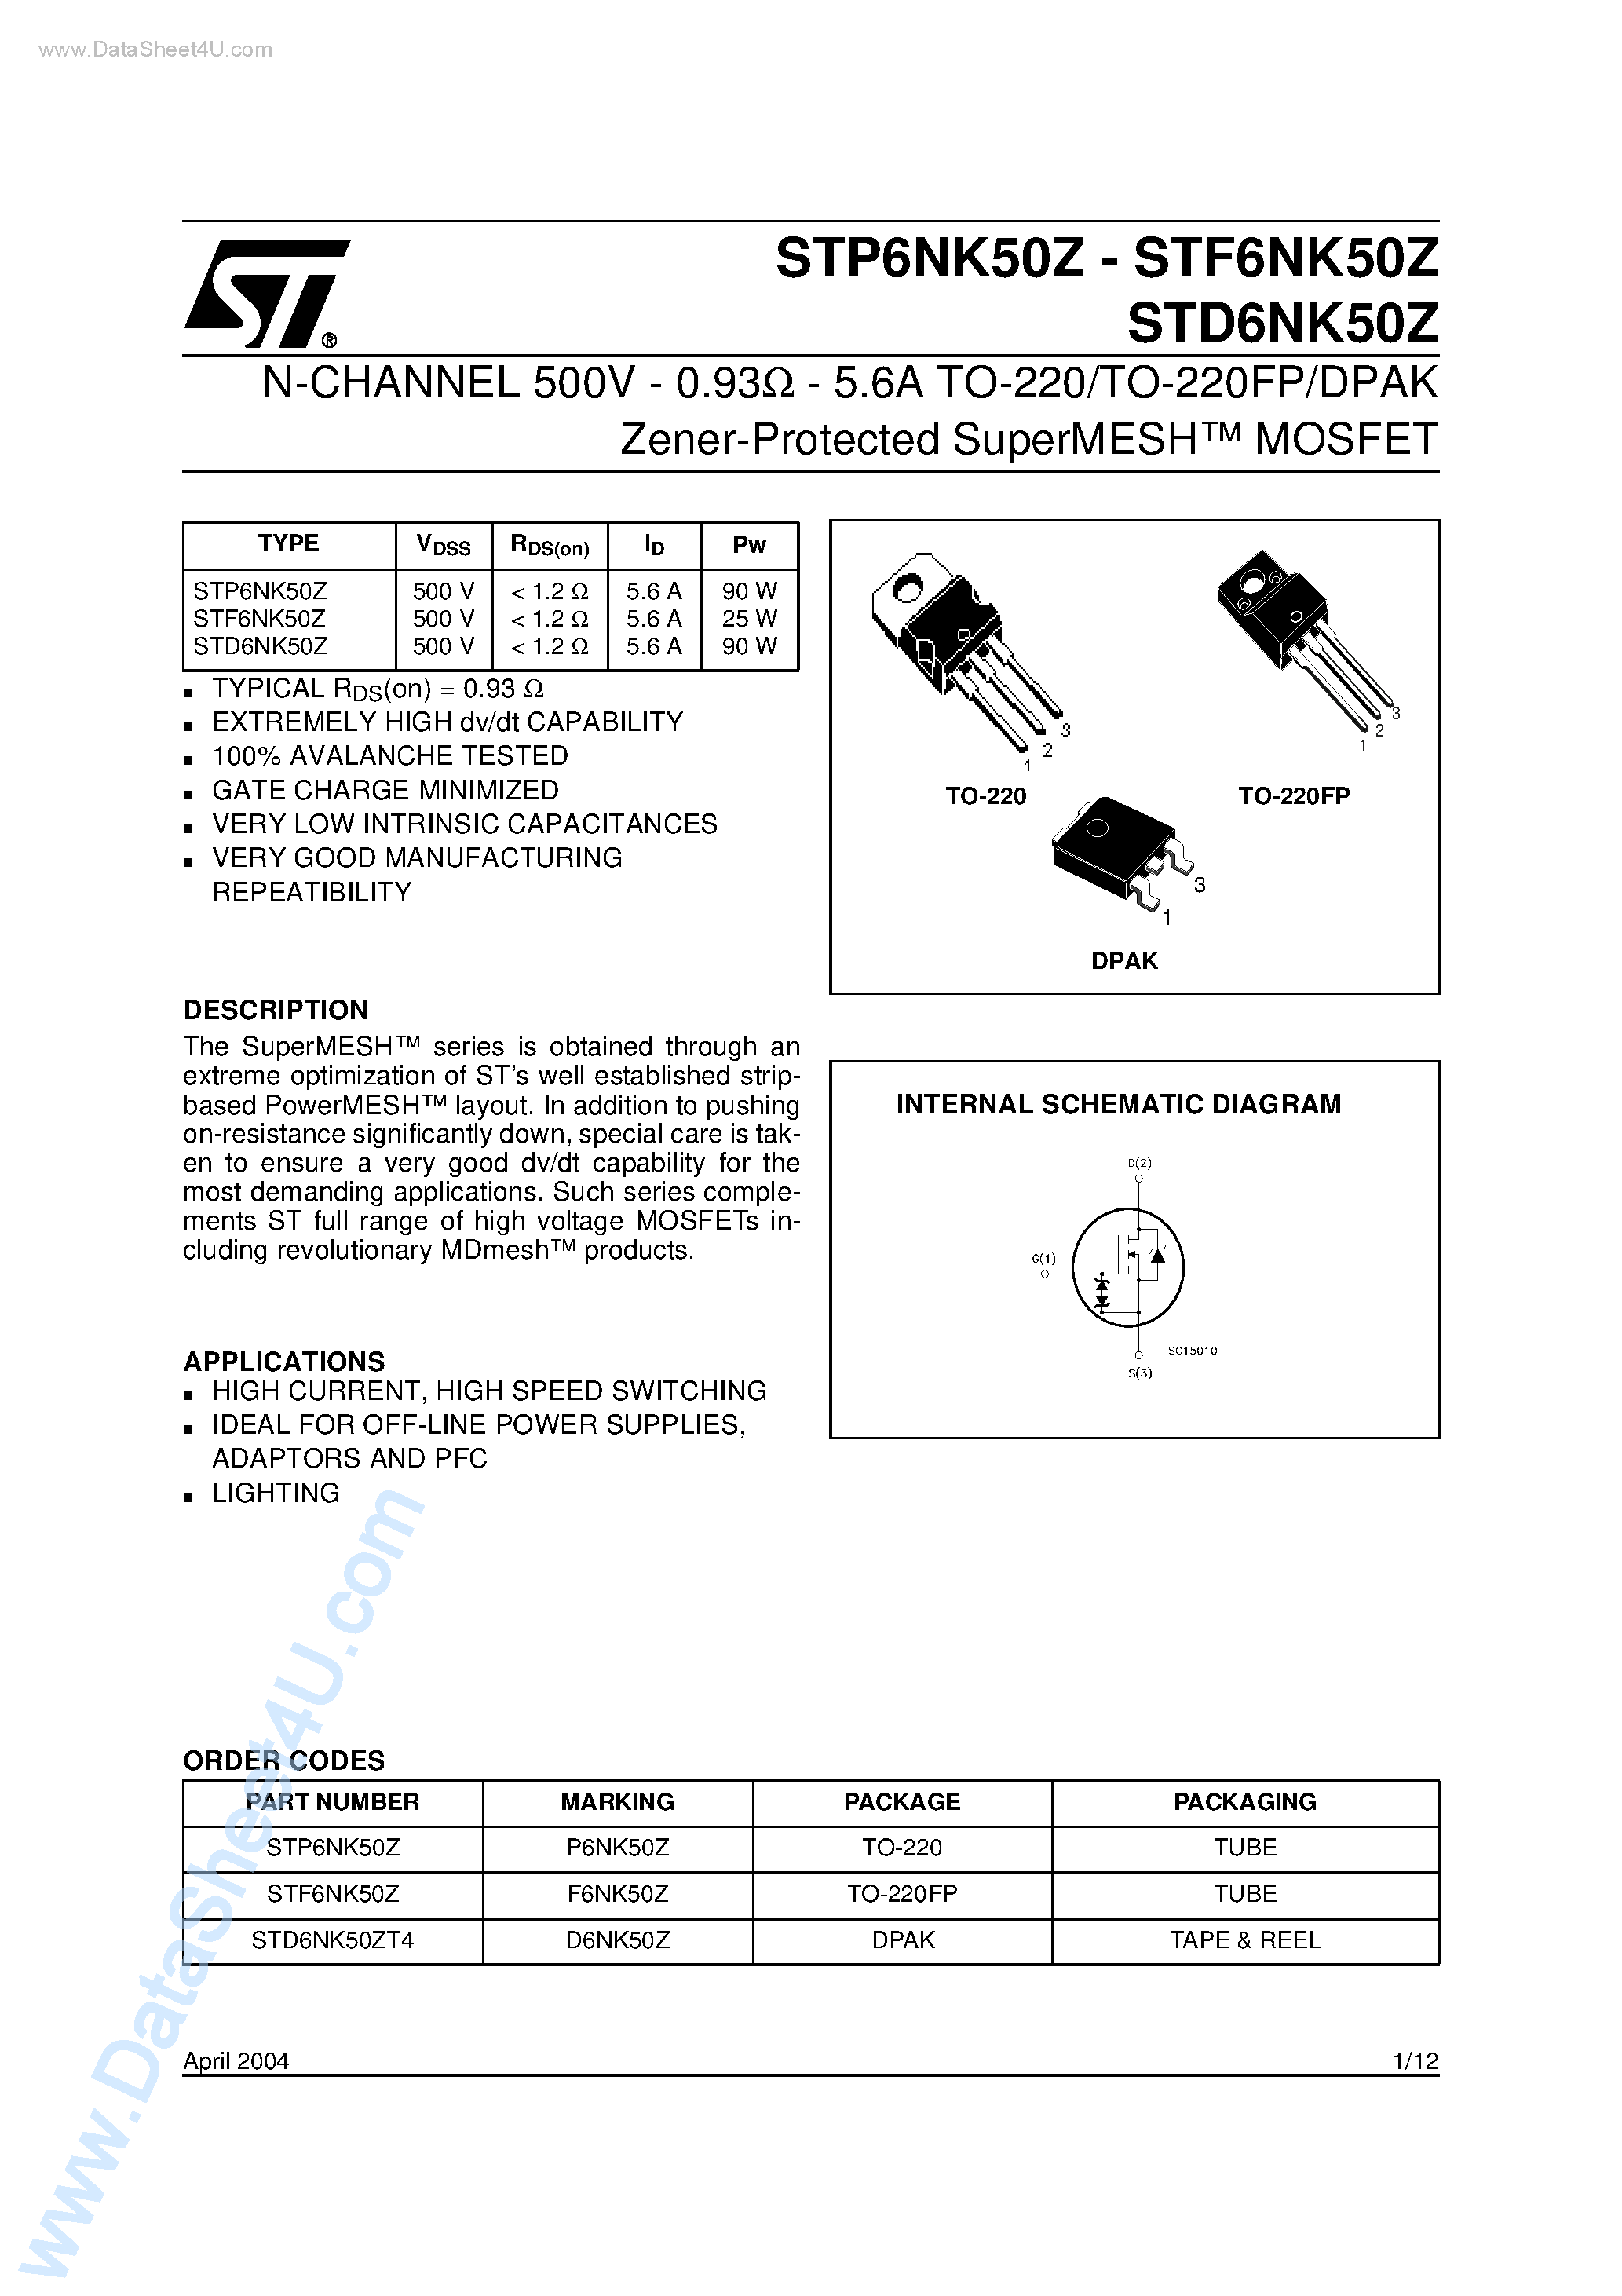 Datasheet STP6NK50Z - N-CHANNEL MOSFET page 1